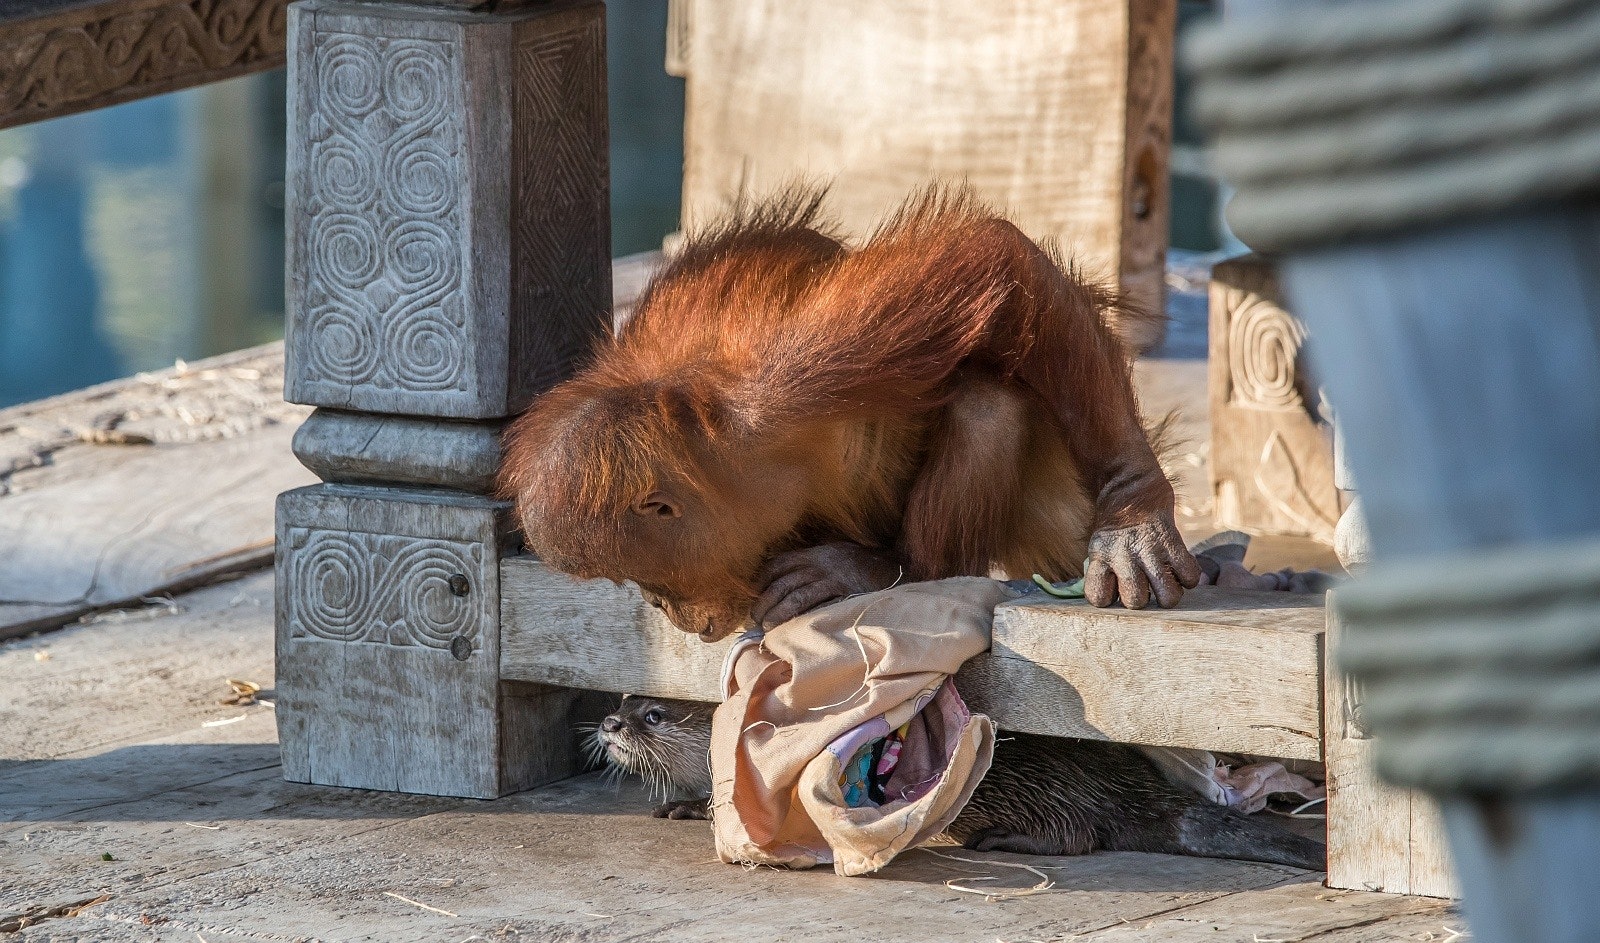 A four-year-old orangutan sits on a low wood structure and peers underneath where several otters are hiding.